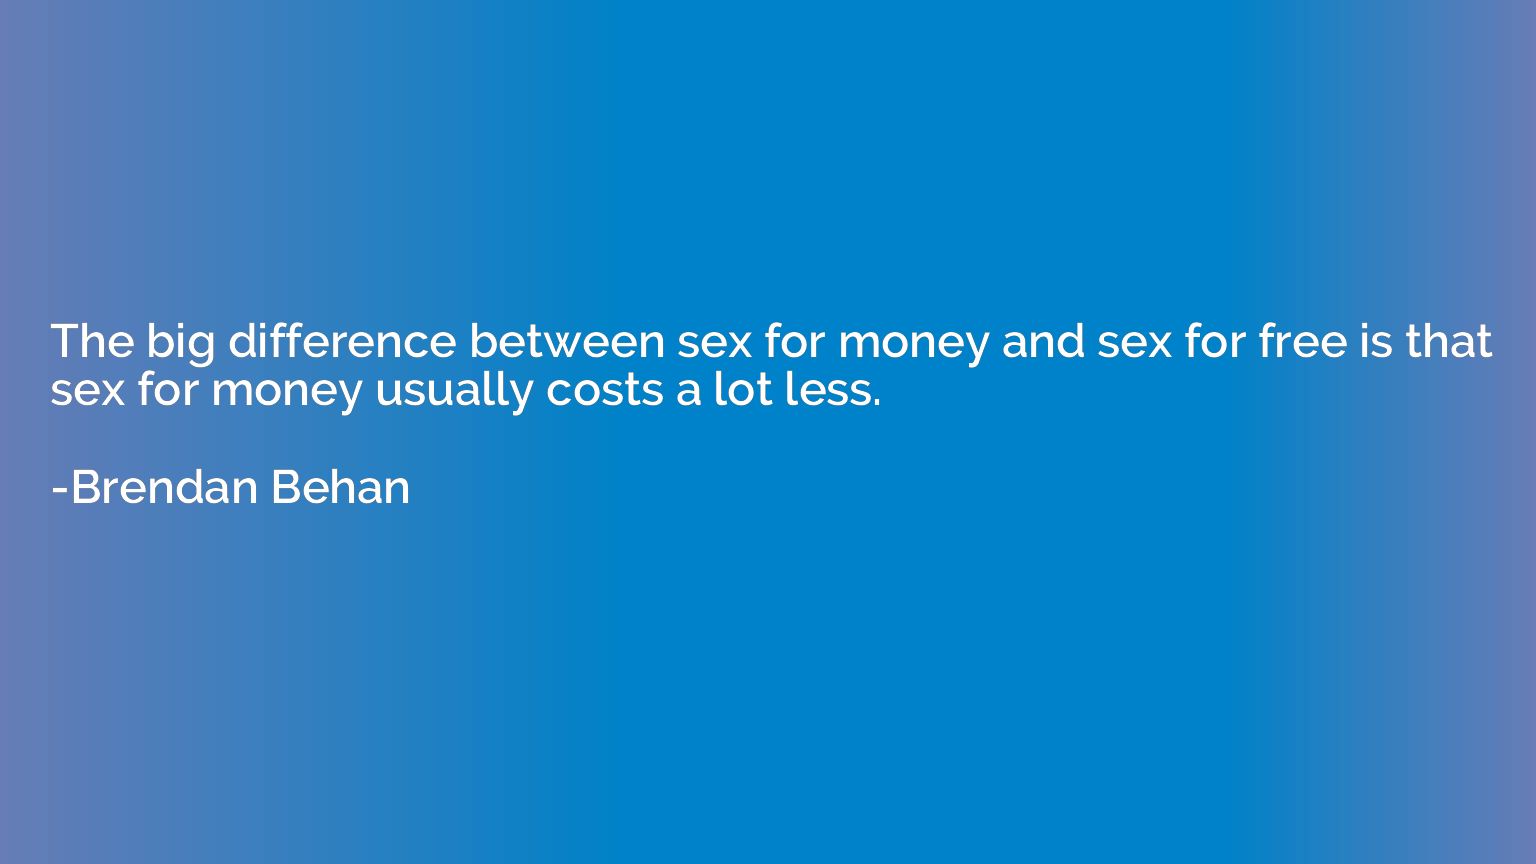 The big difference between sex for money and sex for free is